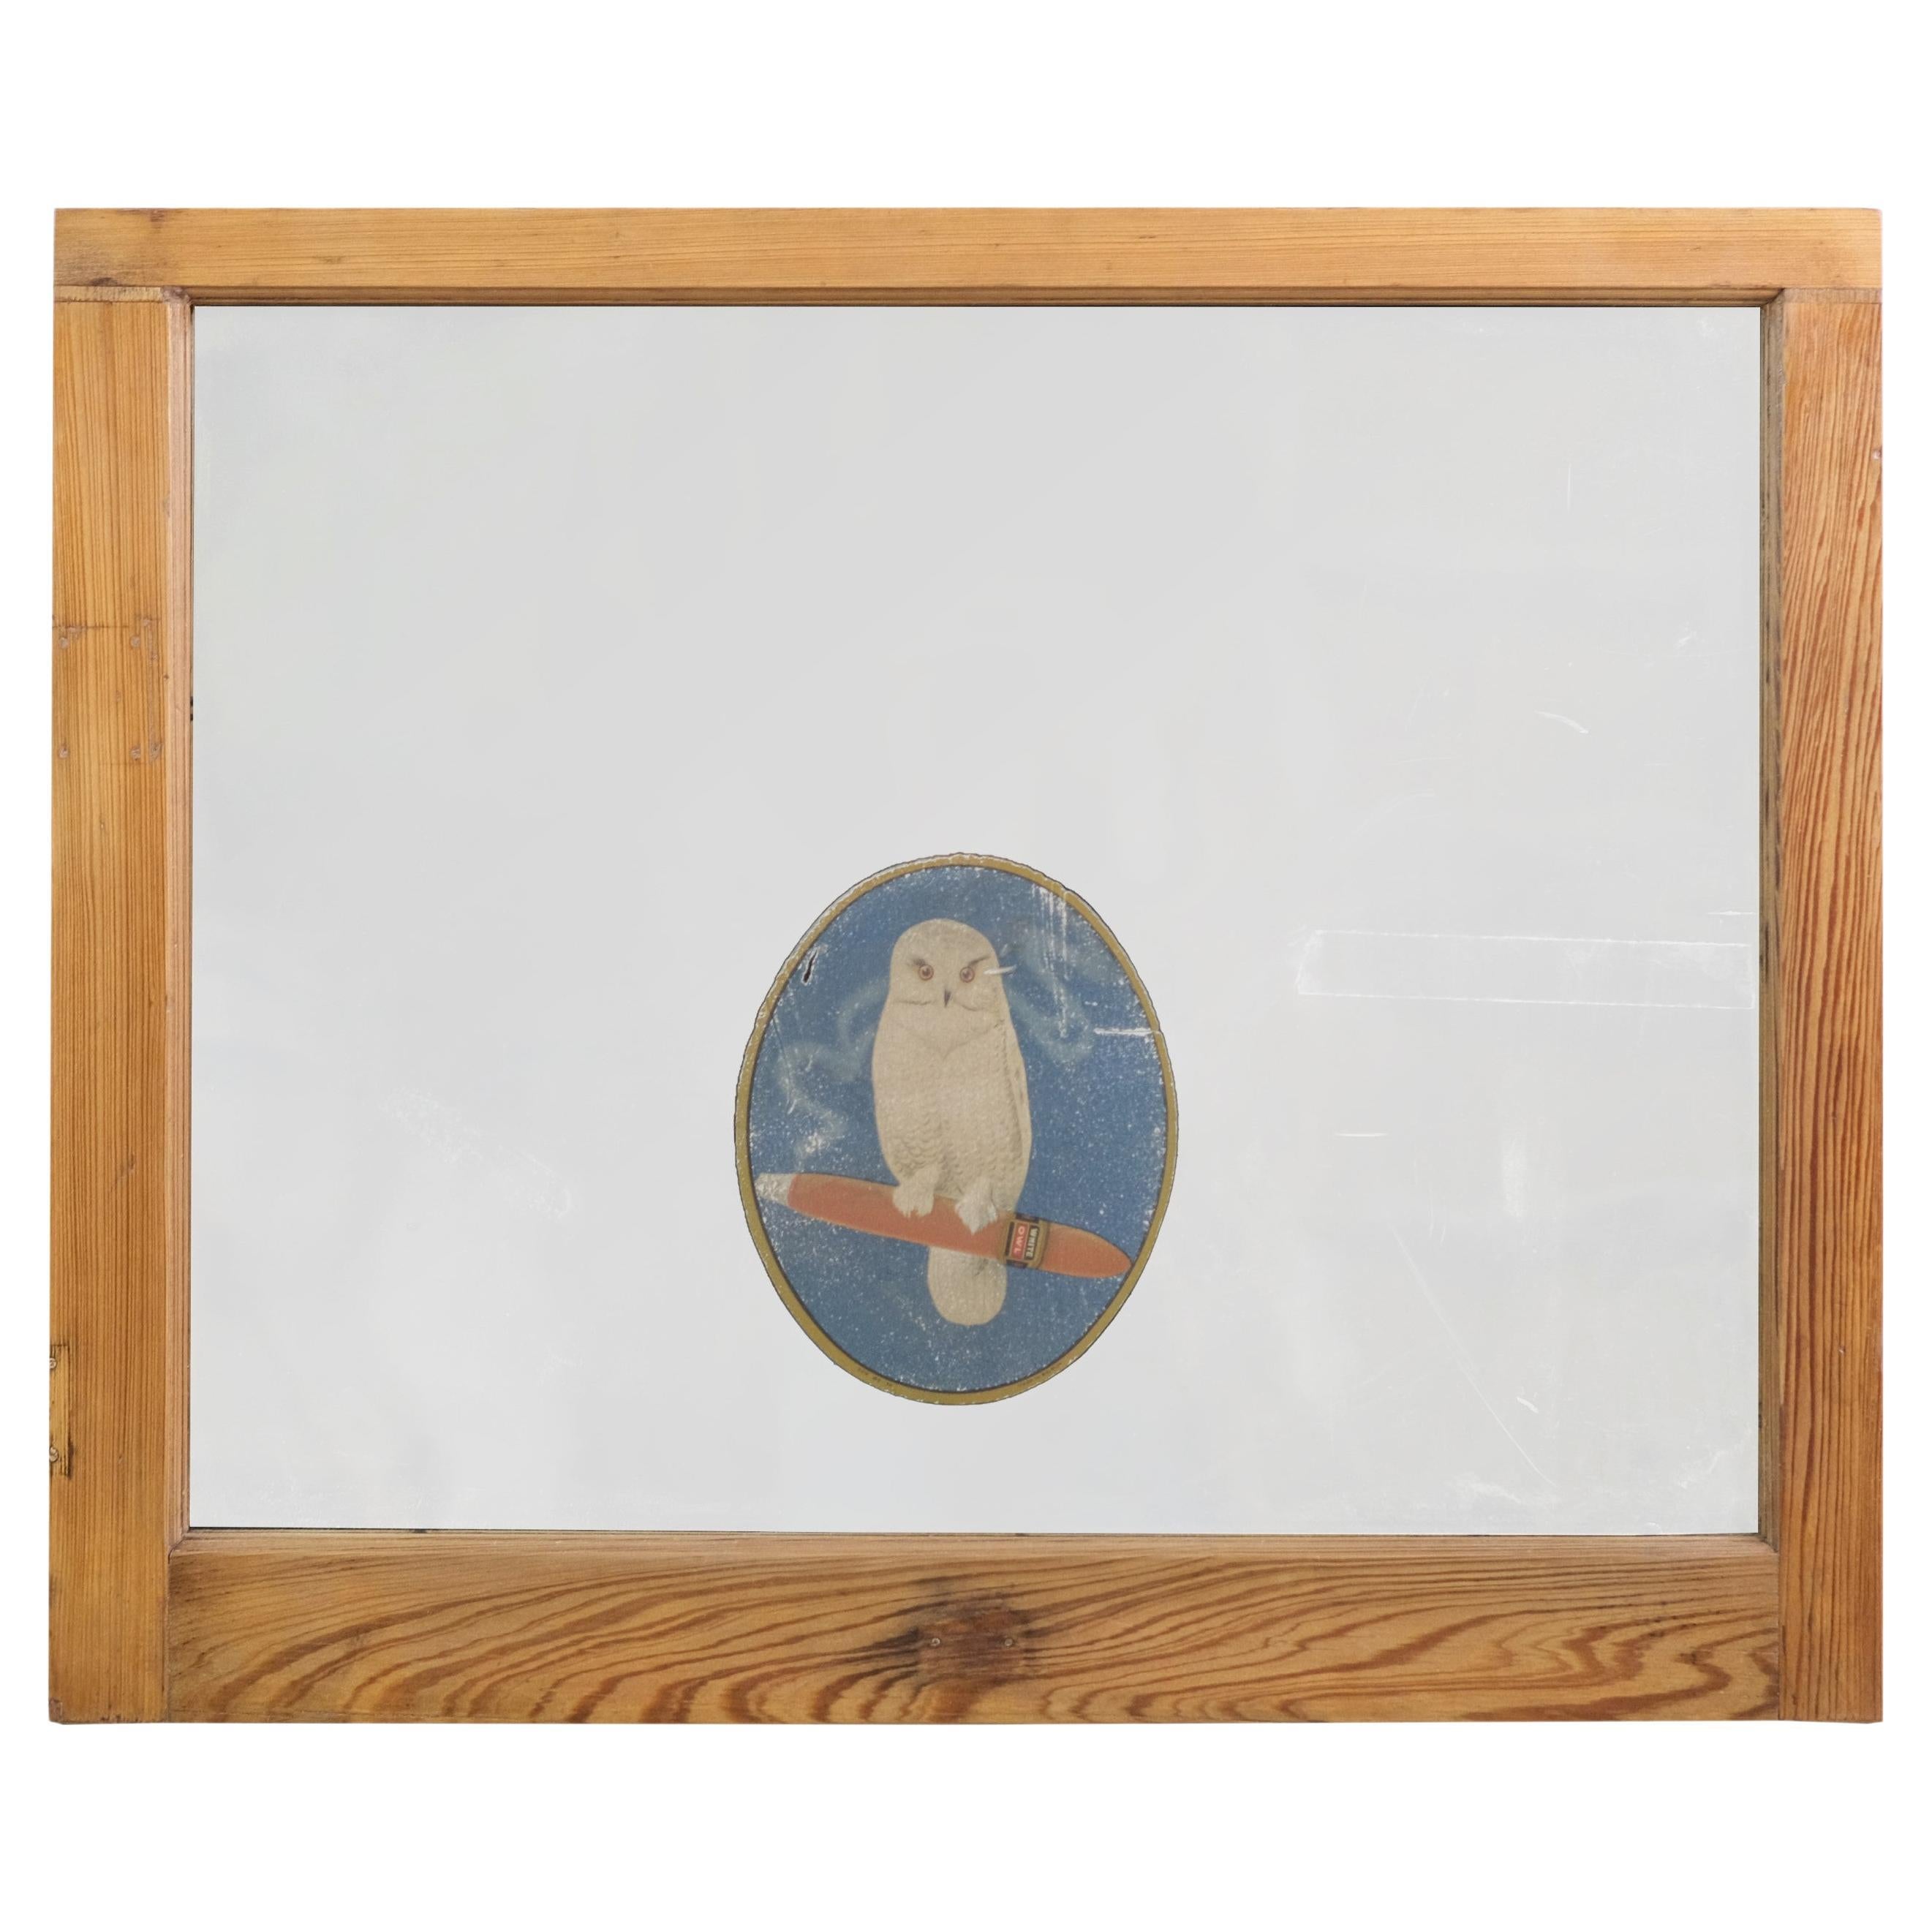 Early Mirrored Wavy Glass Window White Owl Cigar Decal